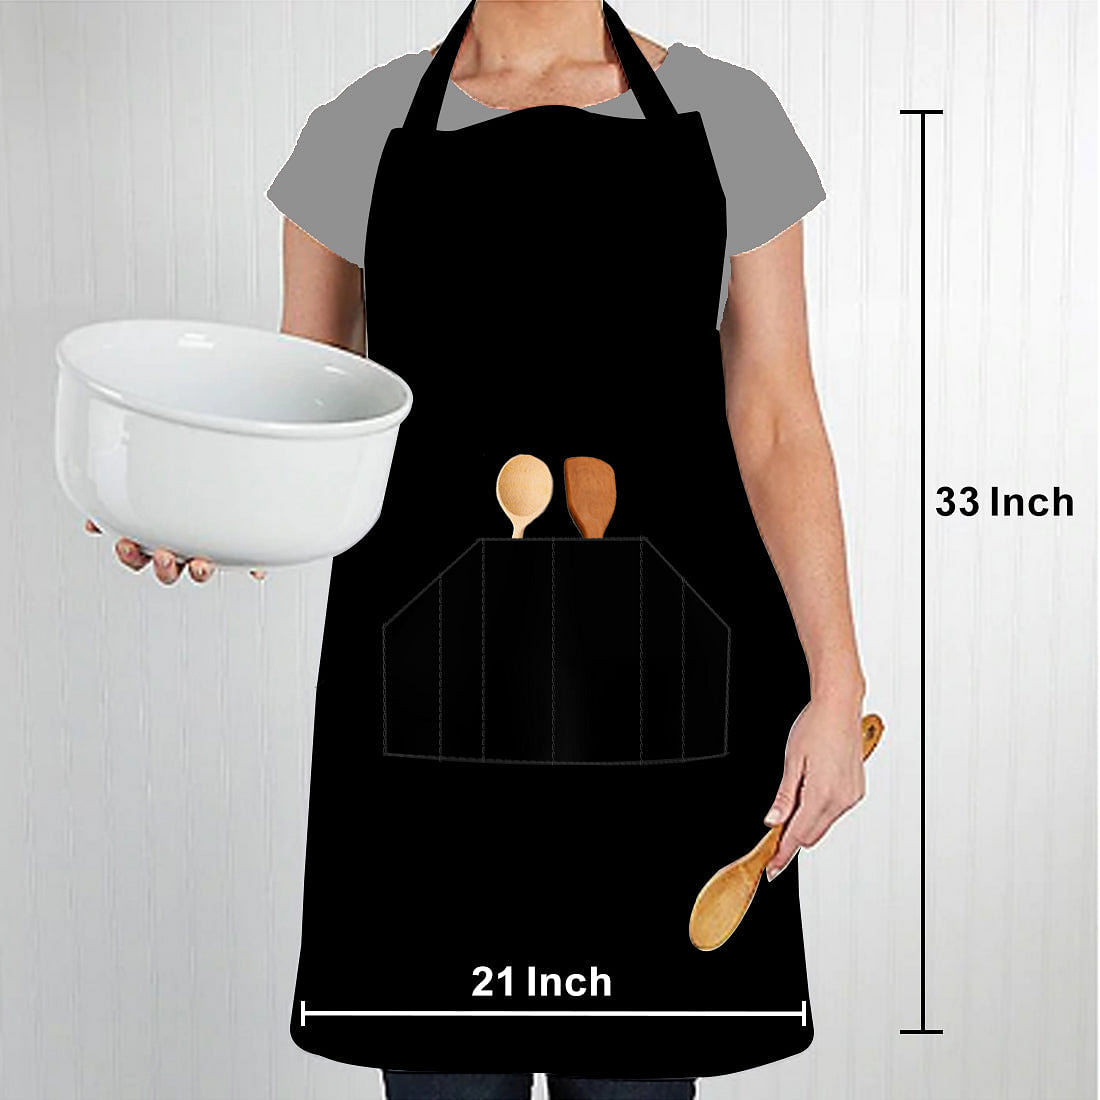 Personalized Apron with Name for Kitchen Baking Cooking - Queen Cakes Nutcase